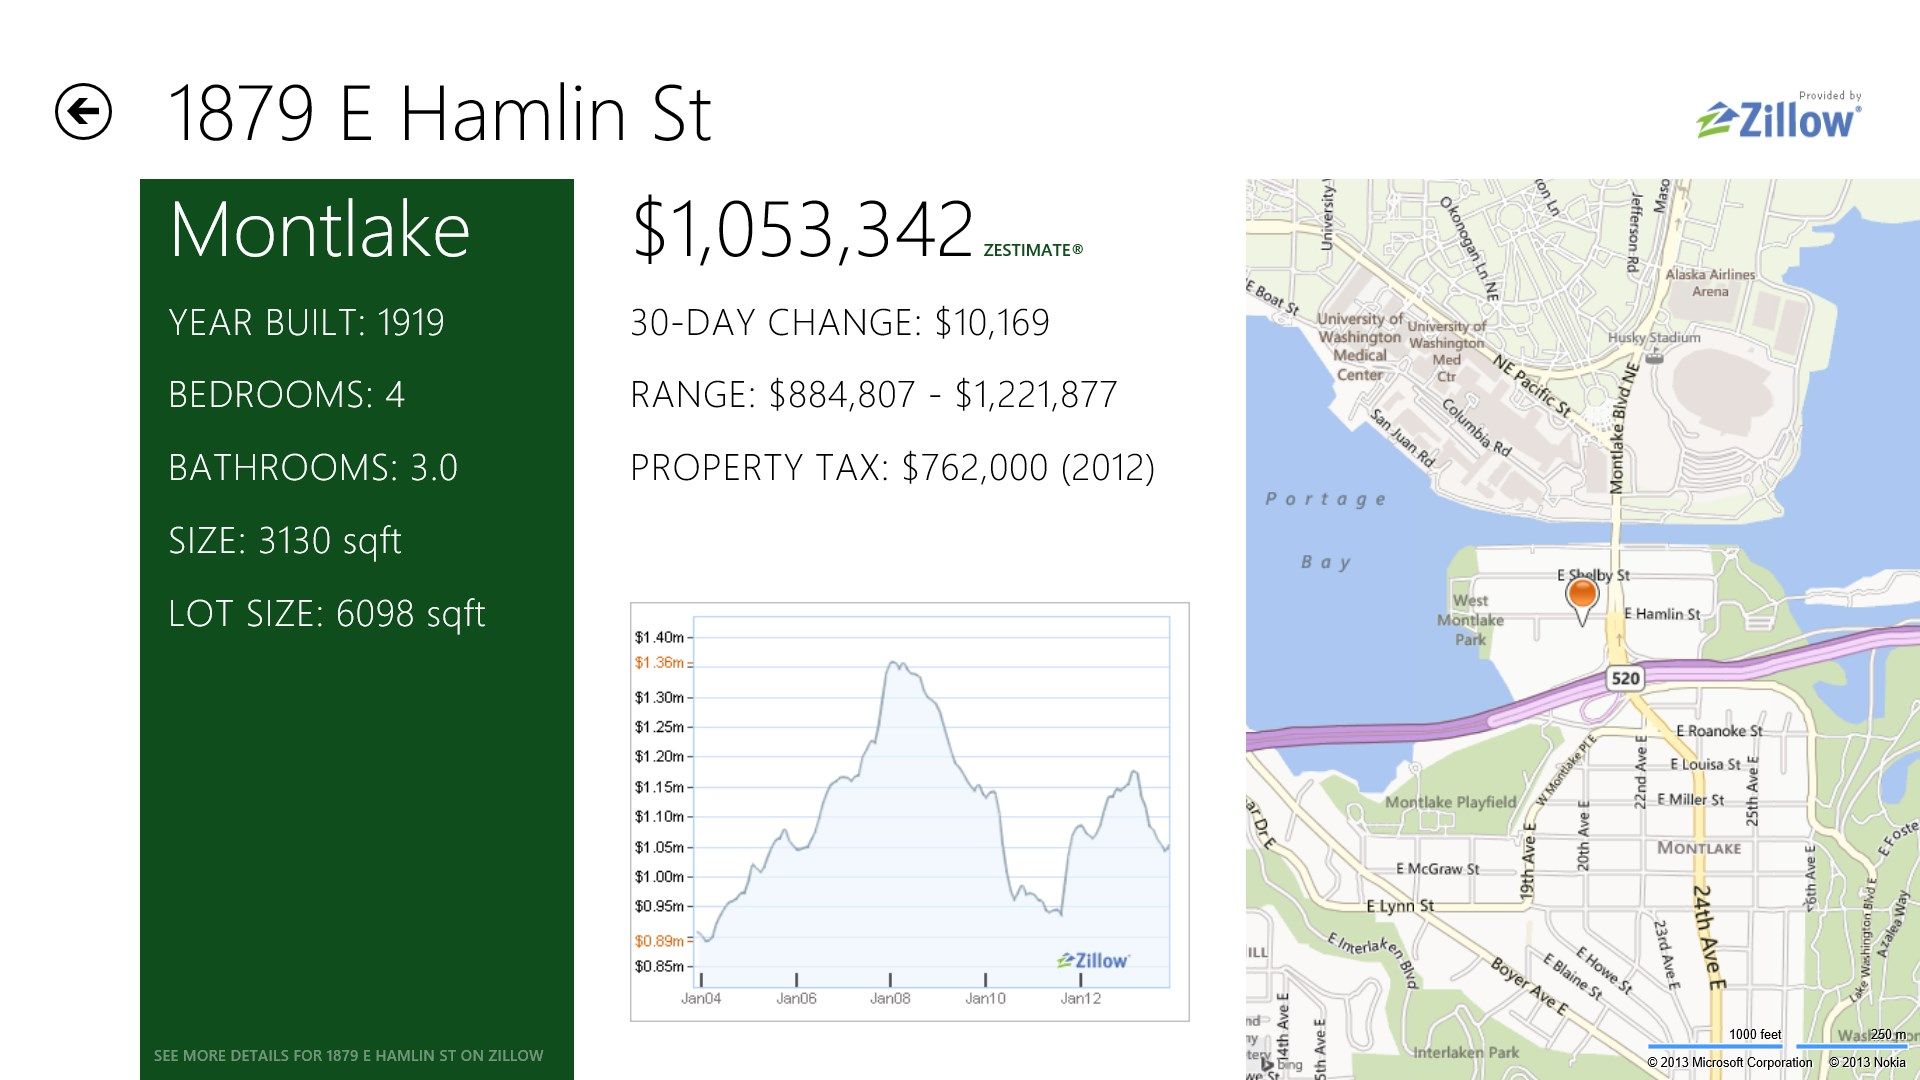 Get up to date data from Zillow about your house.